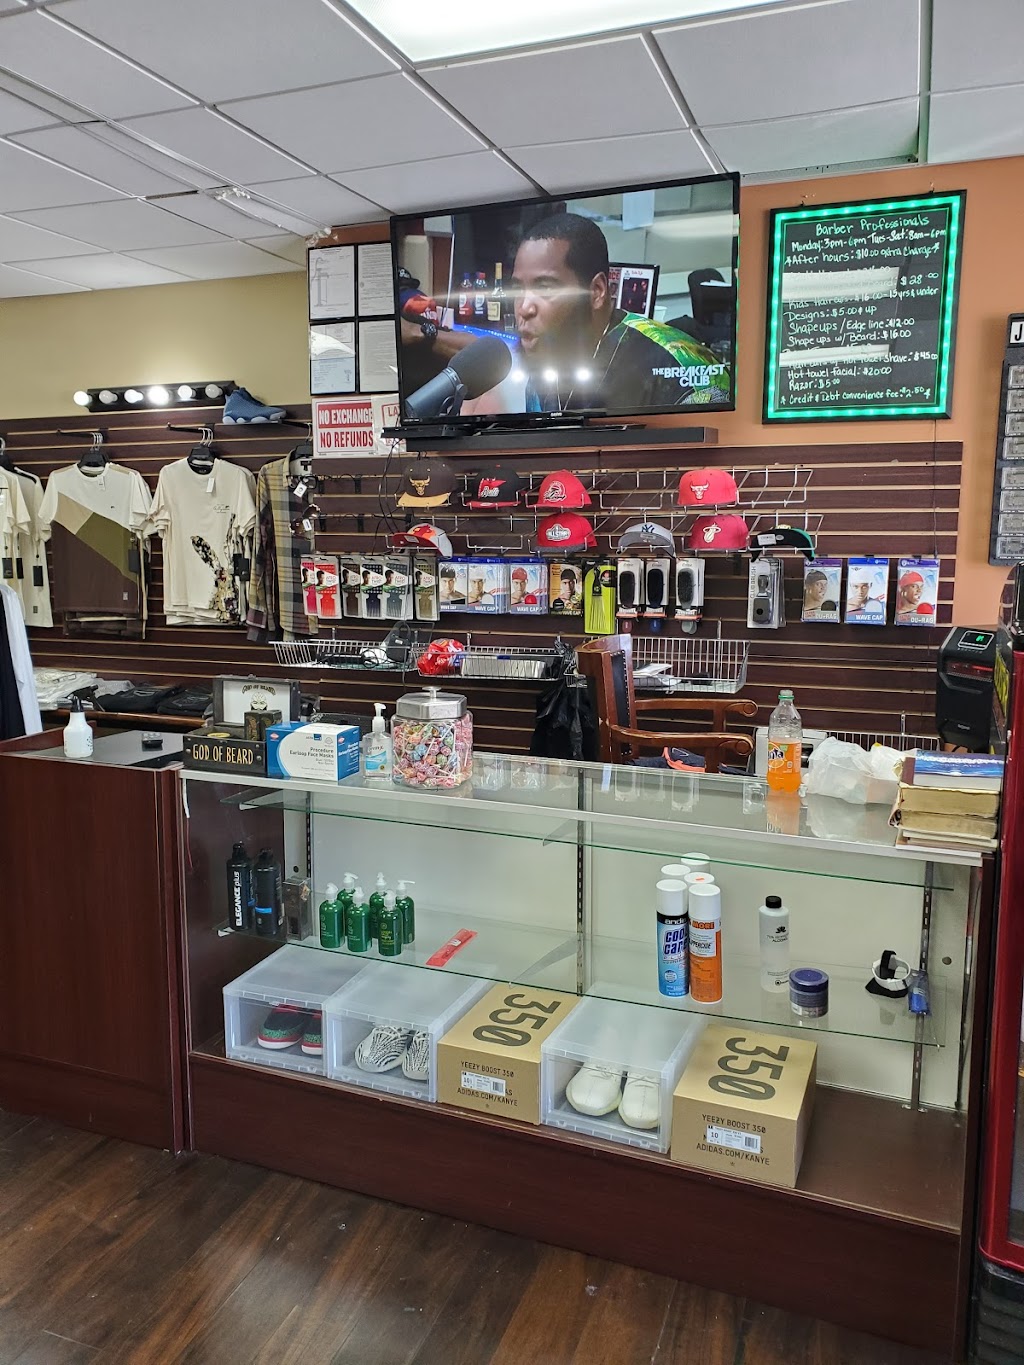 Barber Professionals Barber Shop | 3721 New MacLand Rd Suite 590, Powder Springs, GA 30127, USA | Phone: (770) 549-9947